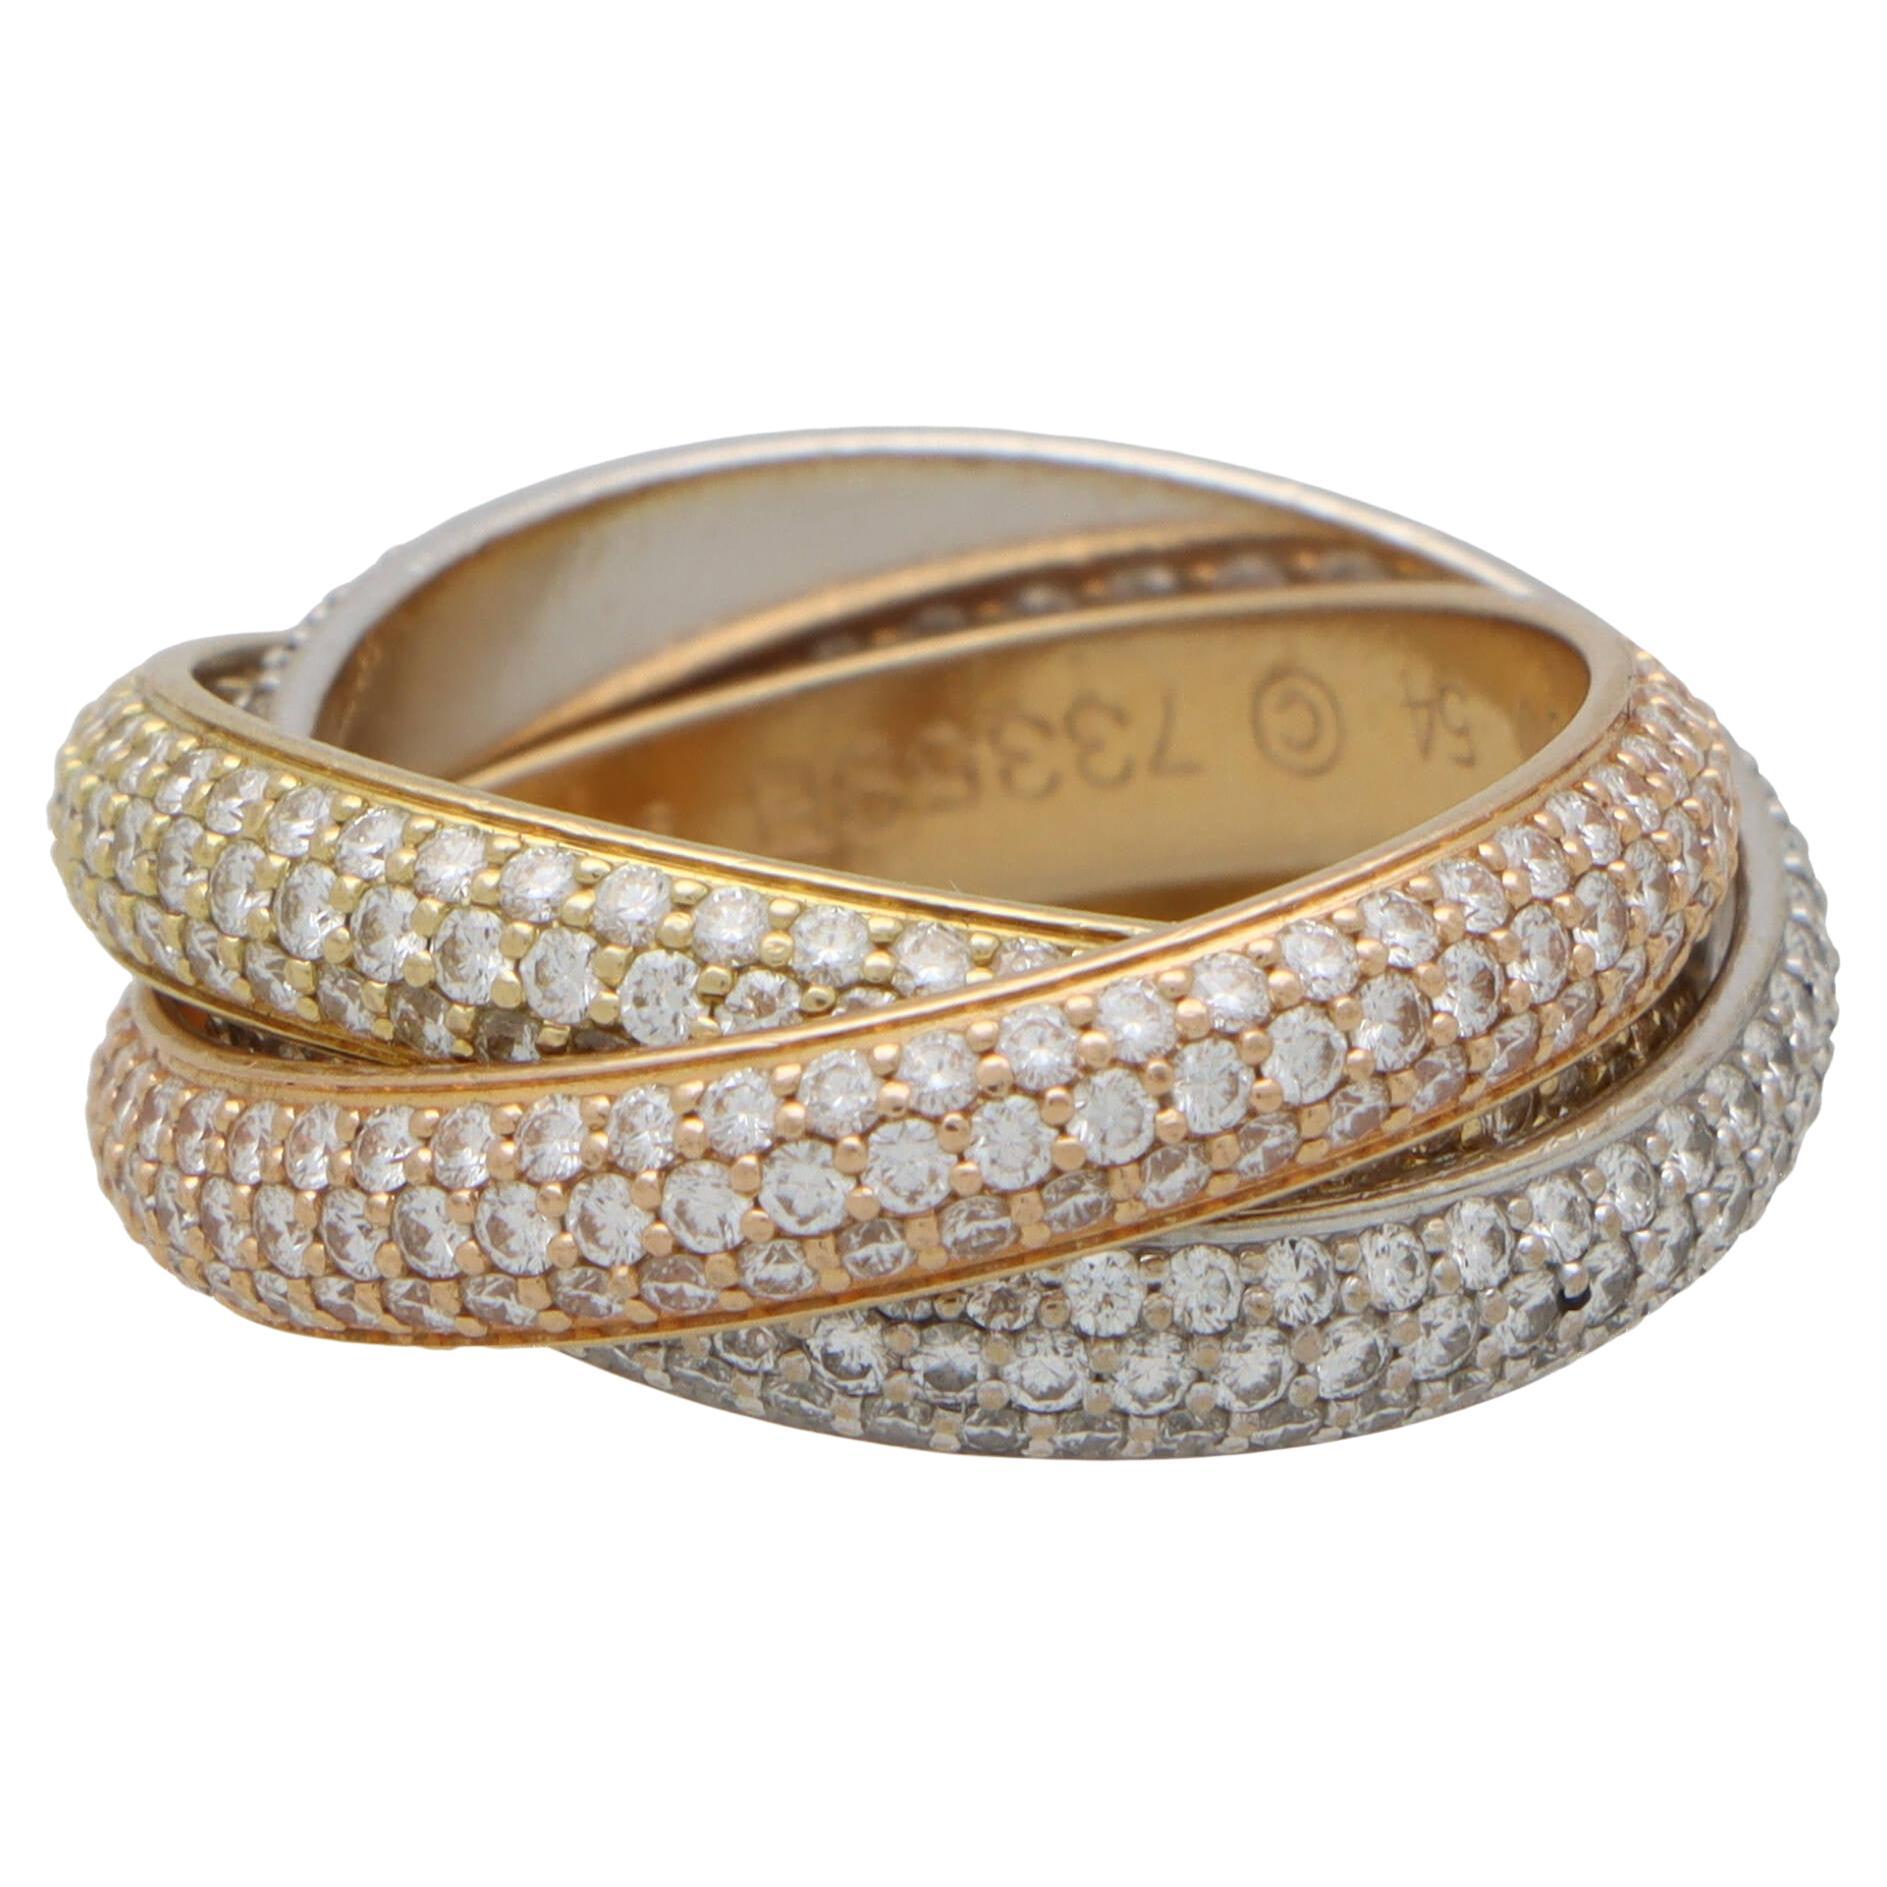 Vintage Cartier Classic Full Diamond Trinity Ring Set in 18k Gold For Sale